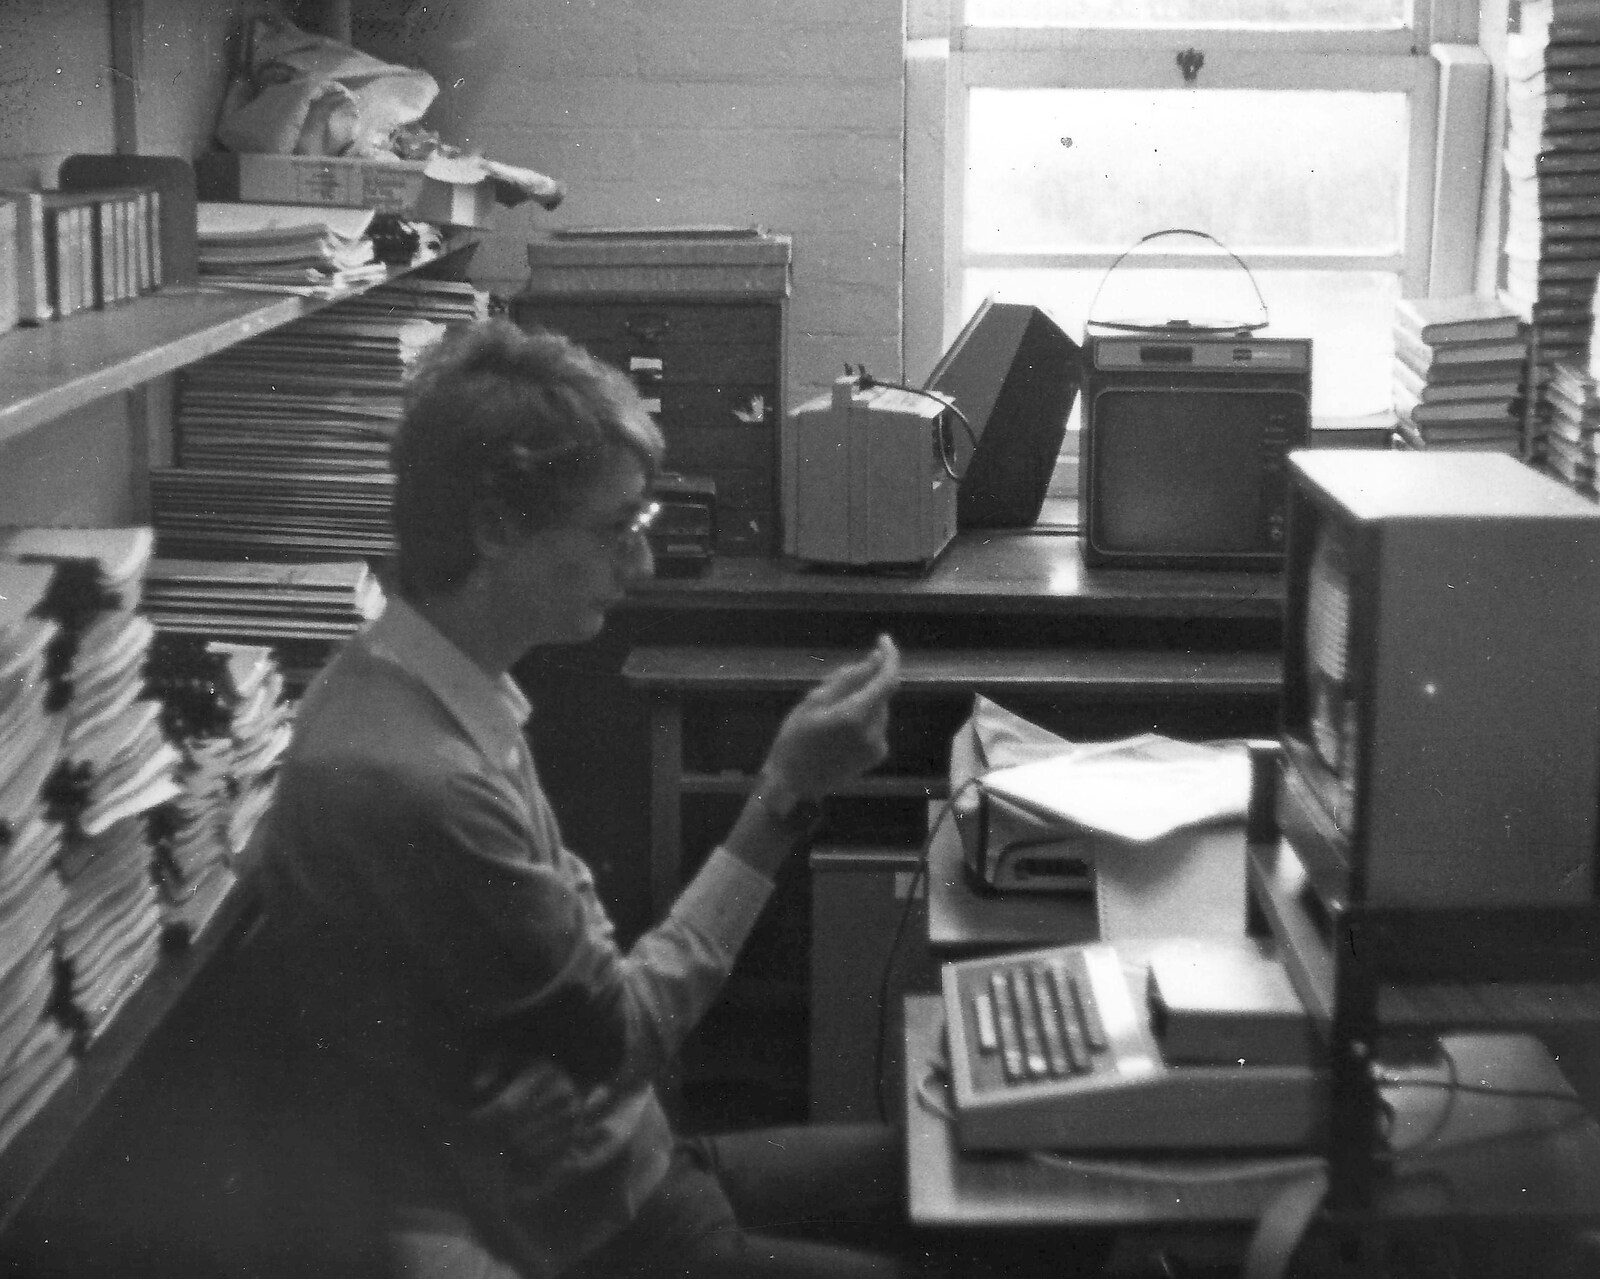 Someone works on a BBC Micro  from Learning Black-and-White Photography, Brockenhurst College, Hampshire - 10th March 1985